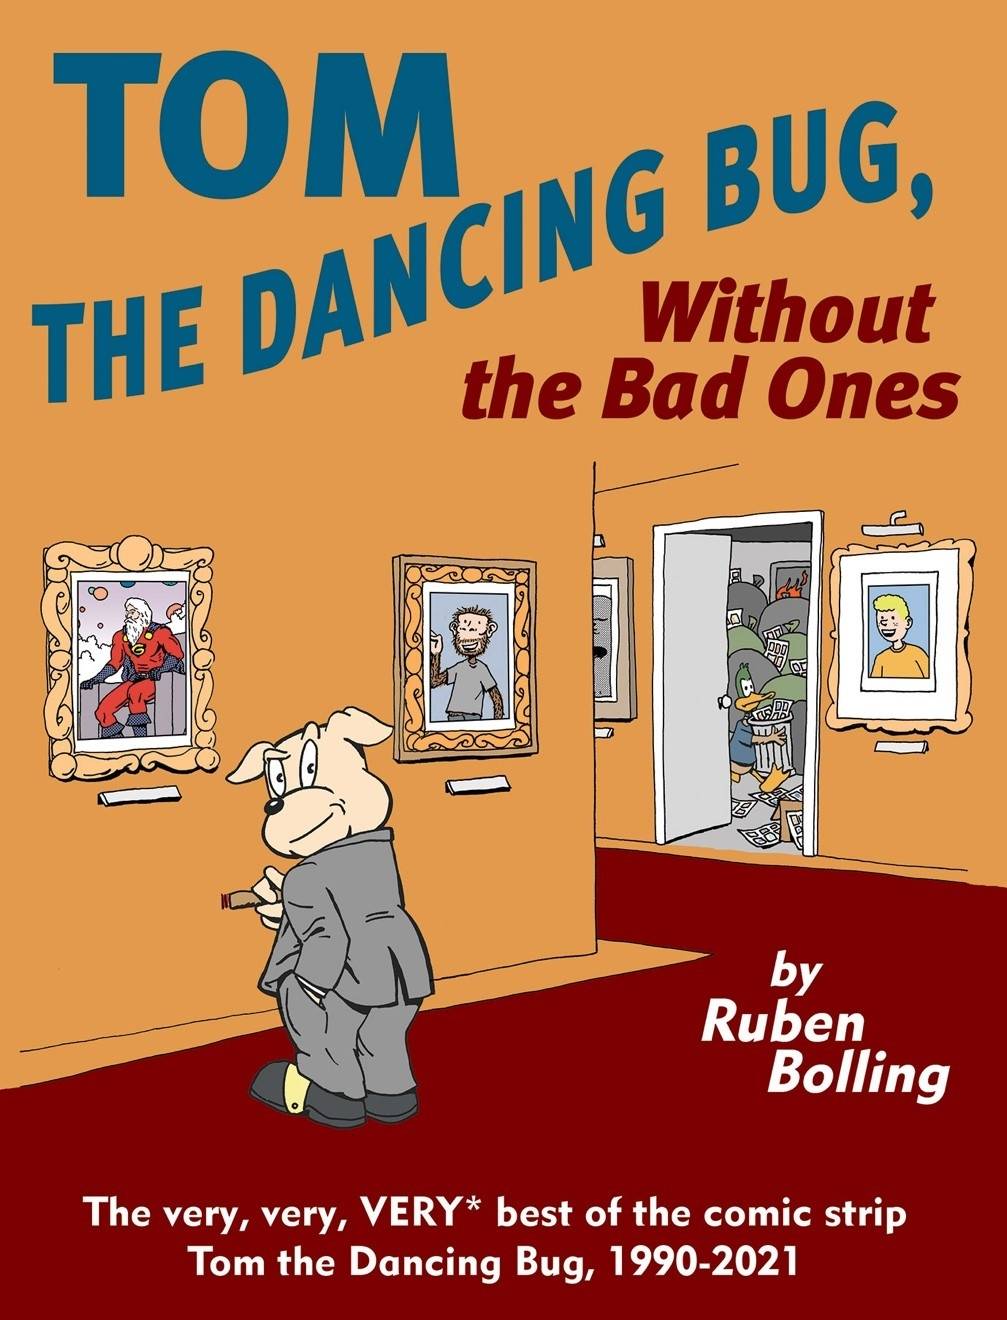 TOM THE DANCING BUG WITHOUT THE BAD ONES